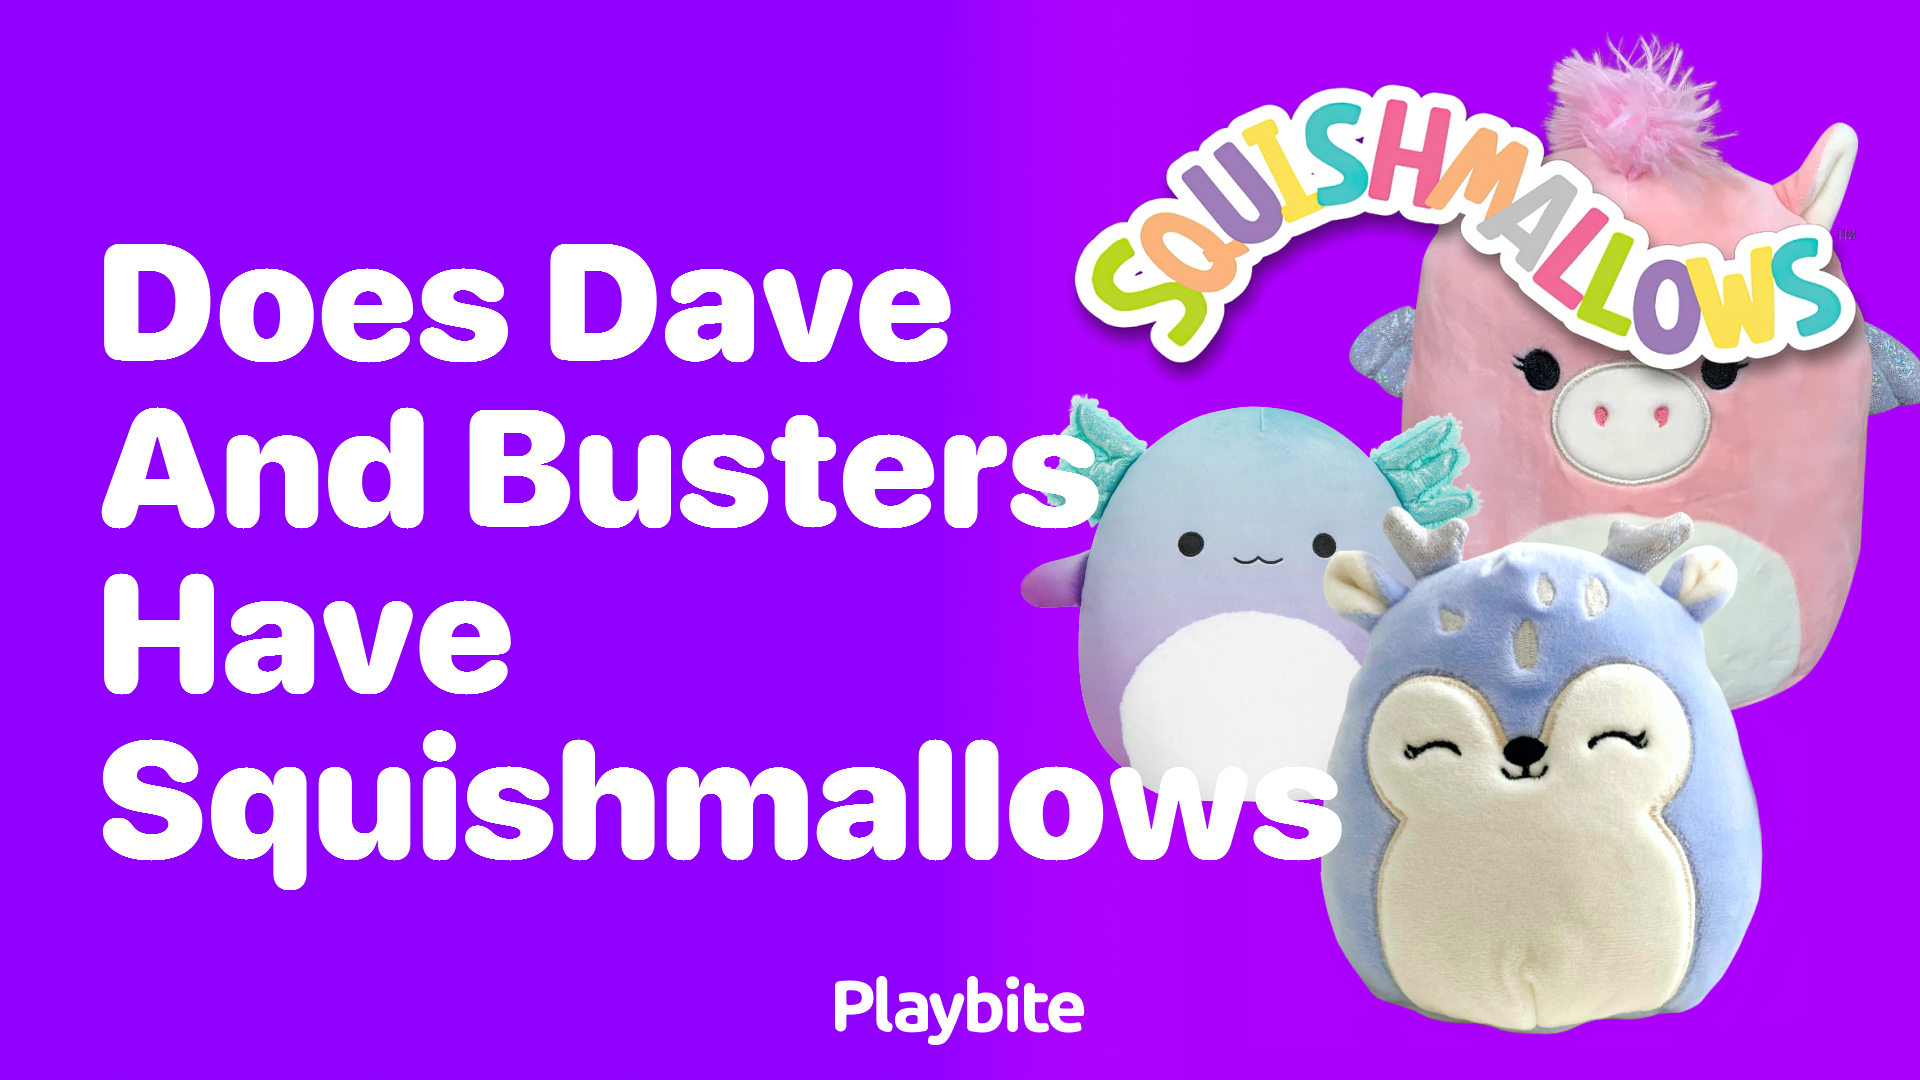 Does Dave and Busters Have Squishmallows?